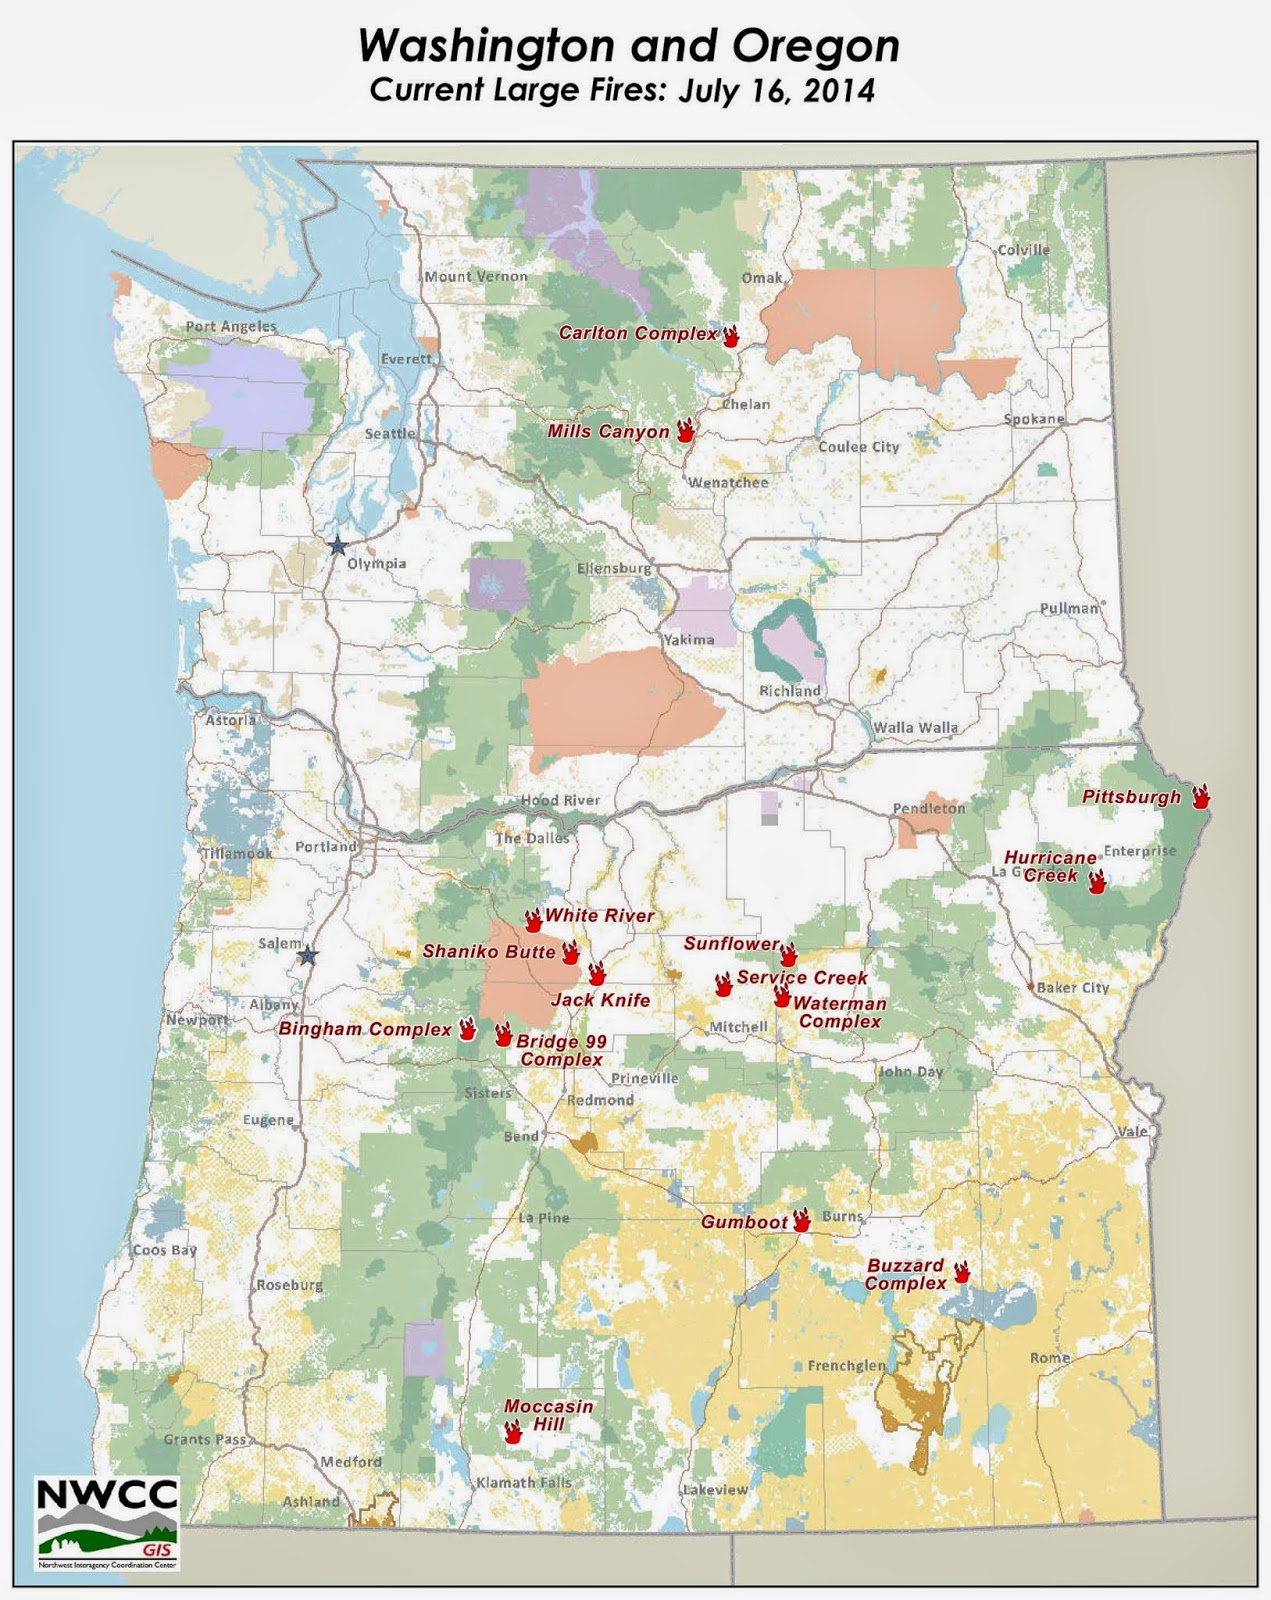 How can you get the status of active wildfires in Oregon?